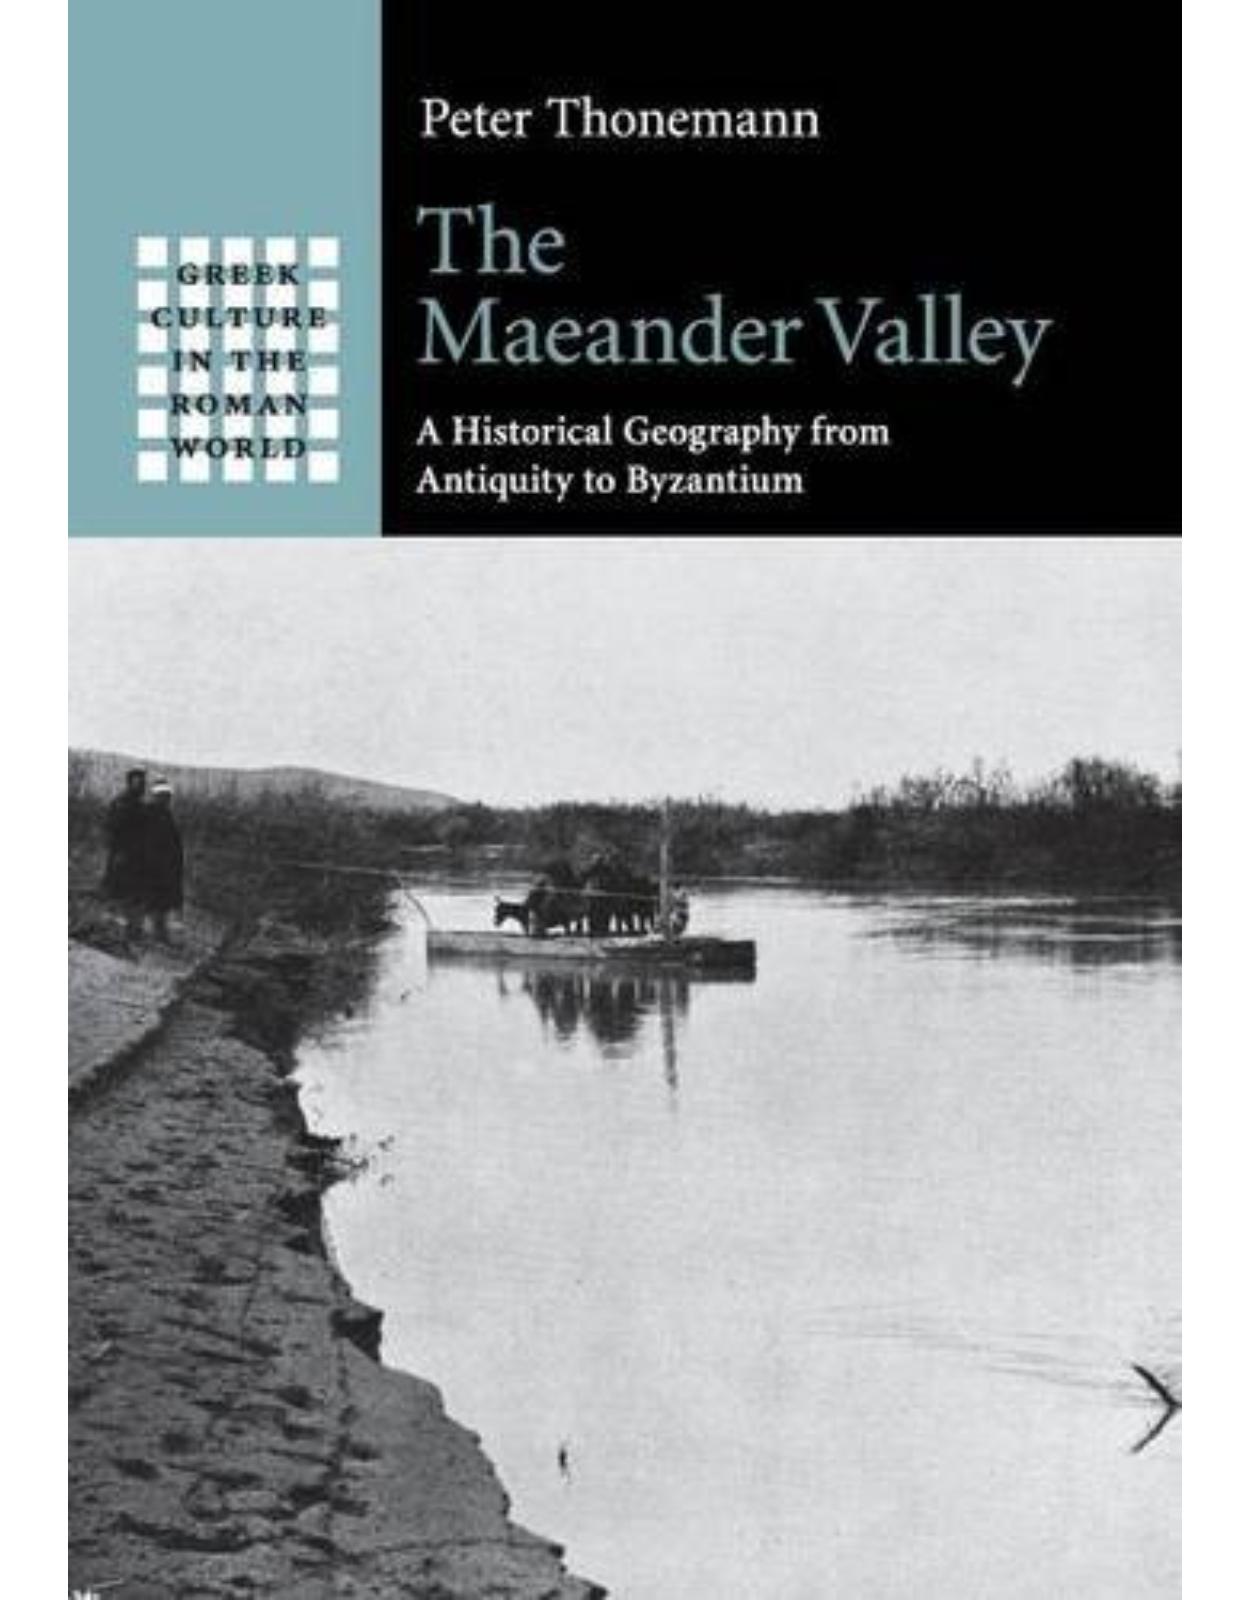 The Maeander Valley: A Historical Geography from Antiquity to Byzantium (Greek Culture in the Roman World)